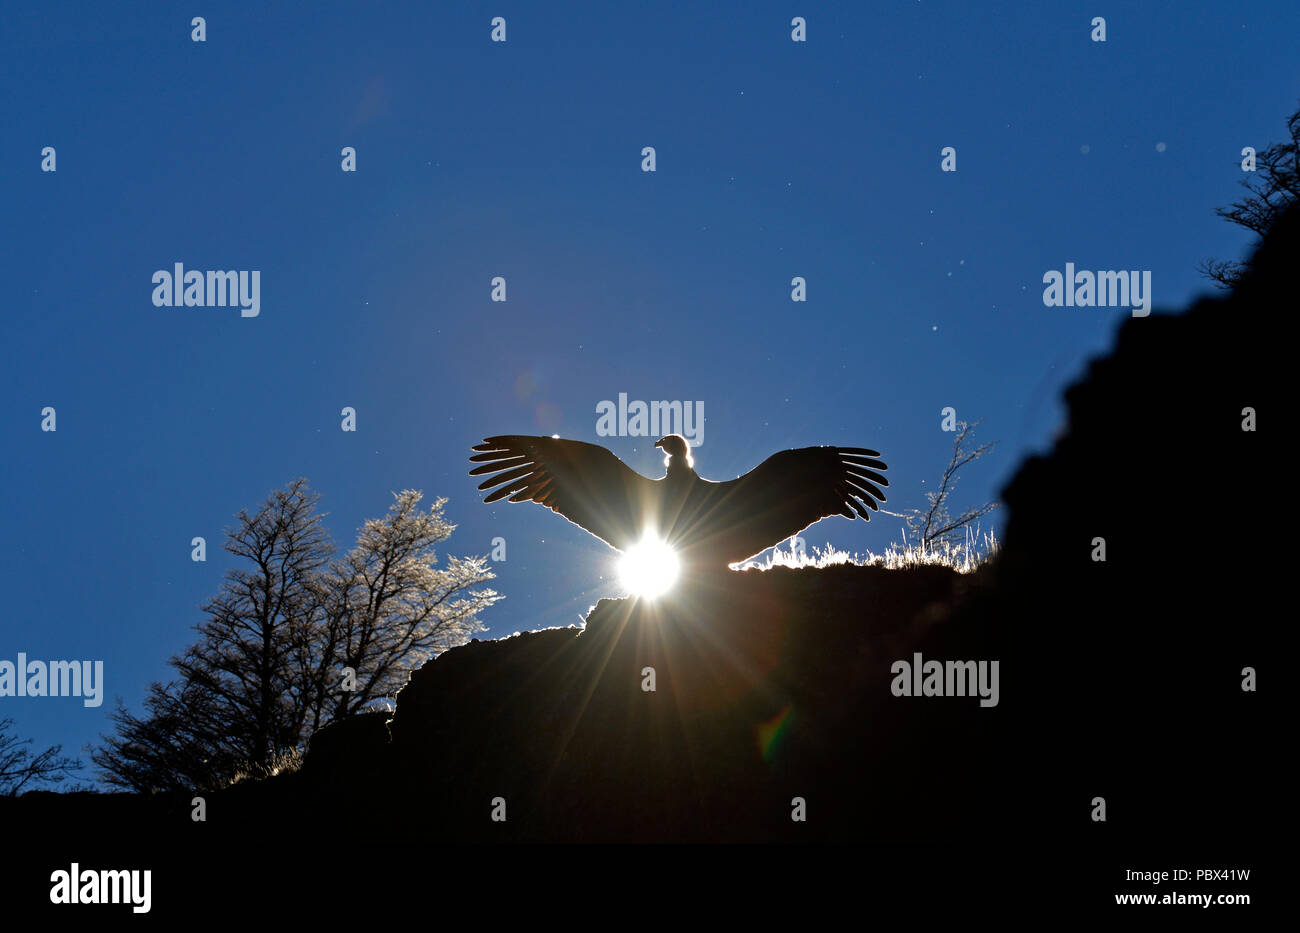 Adult female Andean Condor in silhouette standing on edge of cliff at sunrise airing wings Stock Photo